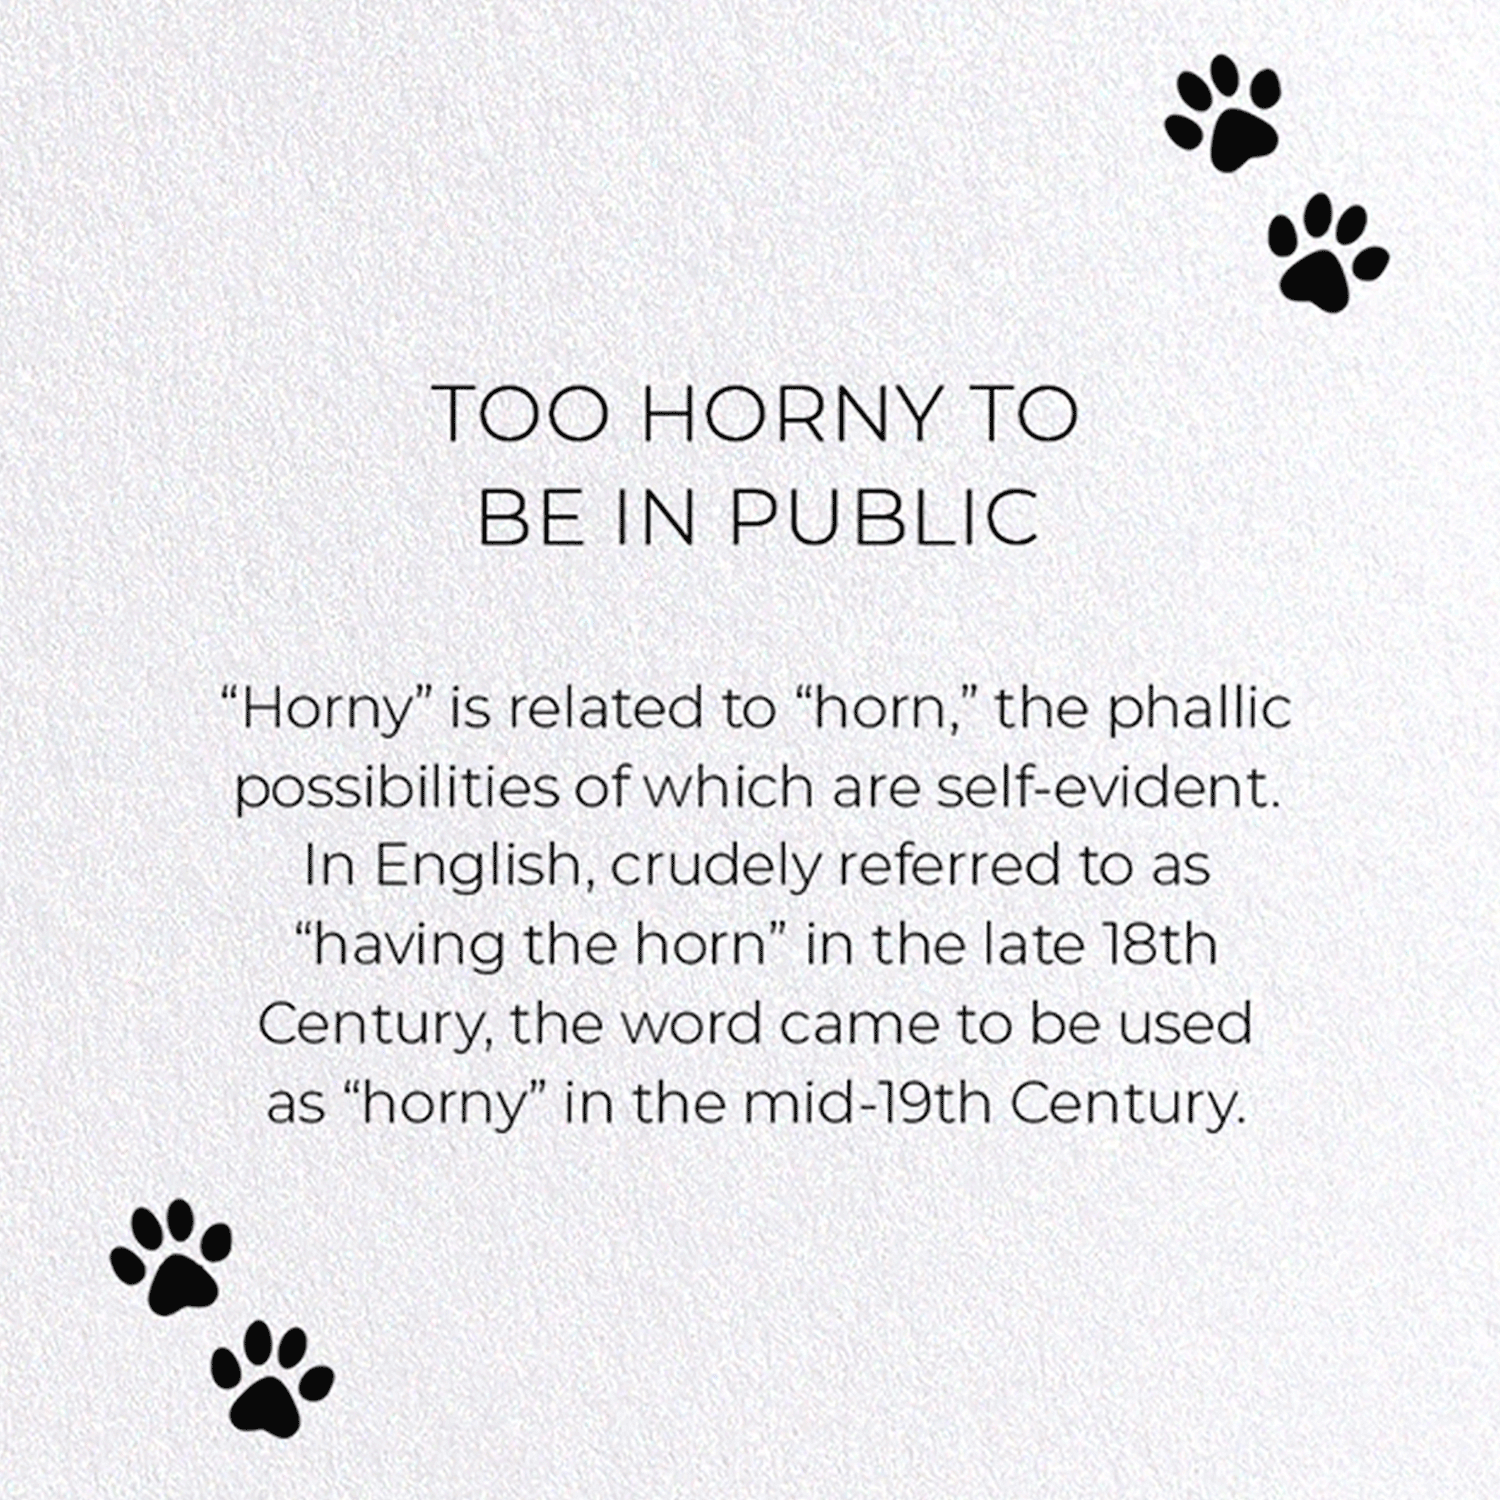 TOO HORNY TO BE IN PUBLIC